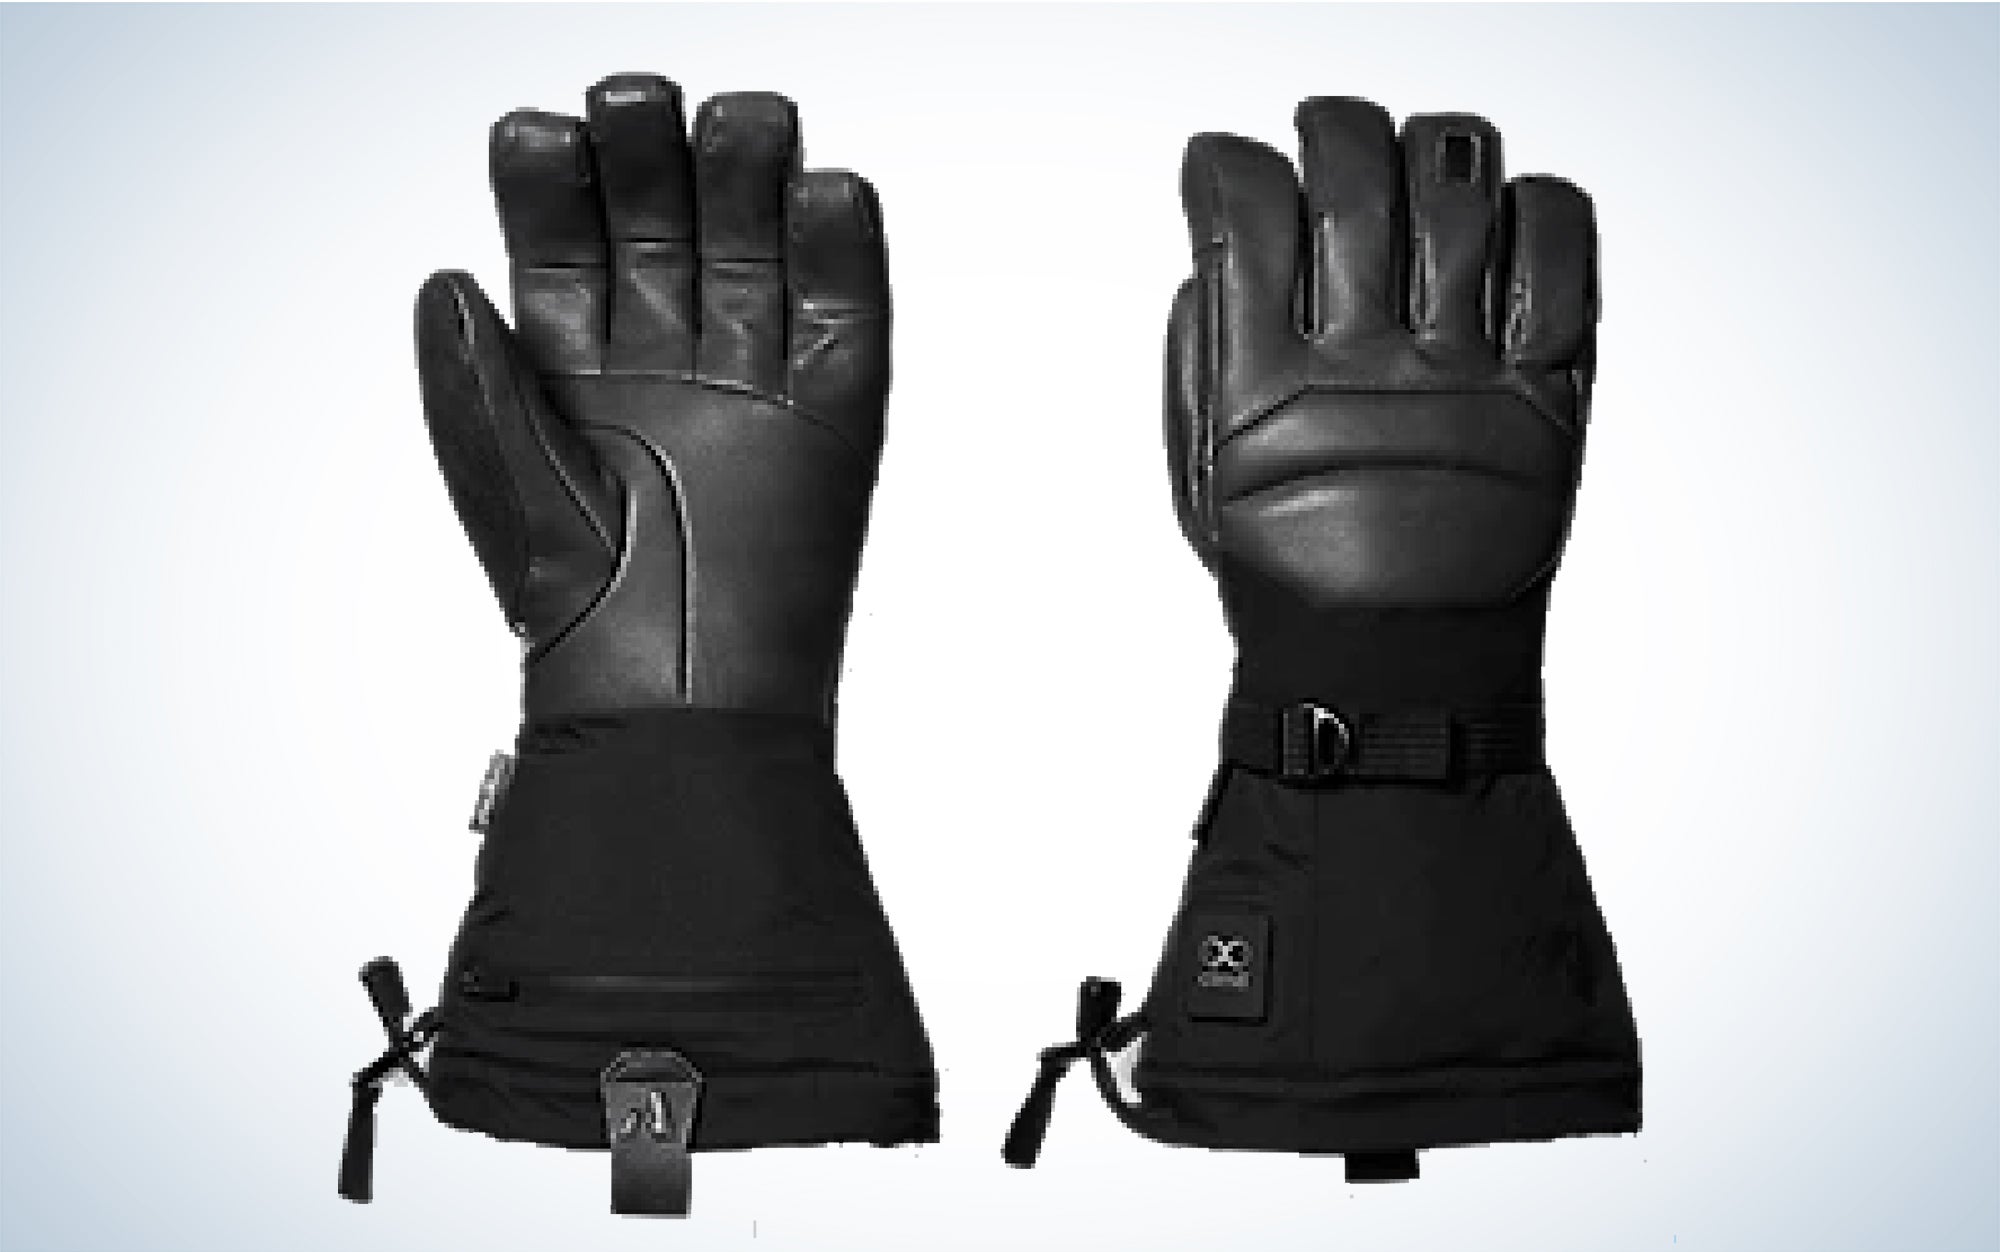 We tested the Eddie Bauer Guide Pro Smart Heated Gloves.